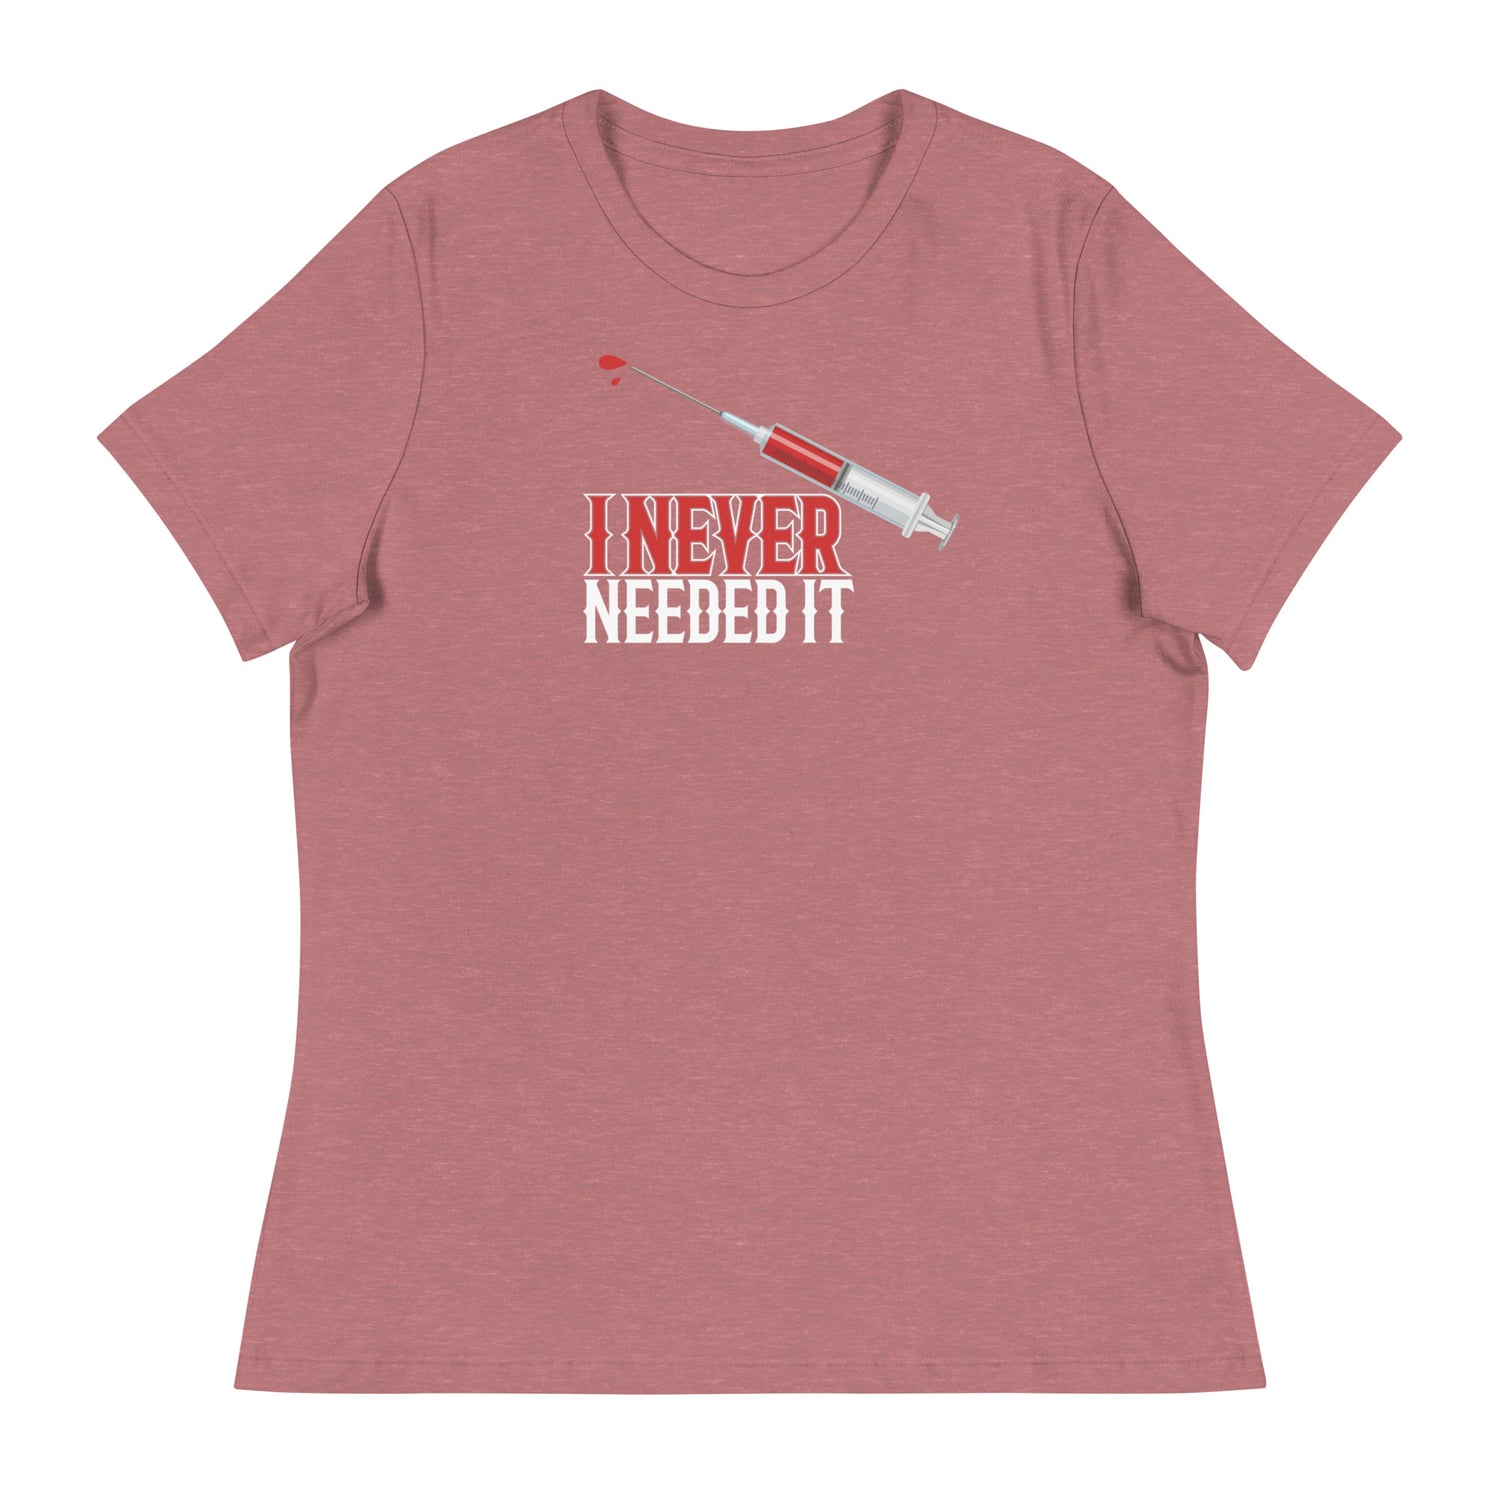 I NEVER NEEDED IT WOMENS FRONT AND BACK T-SHIRT